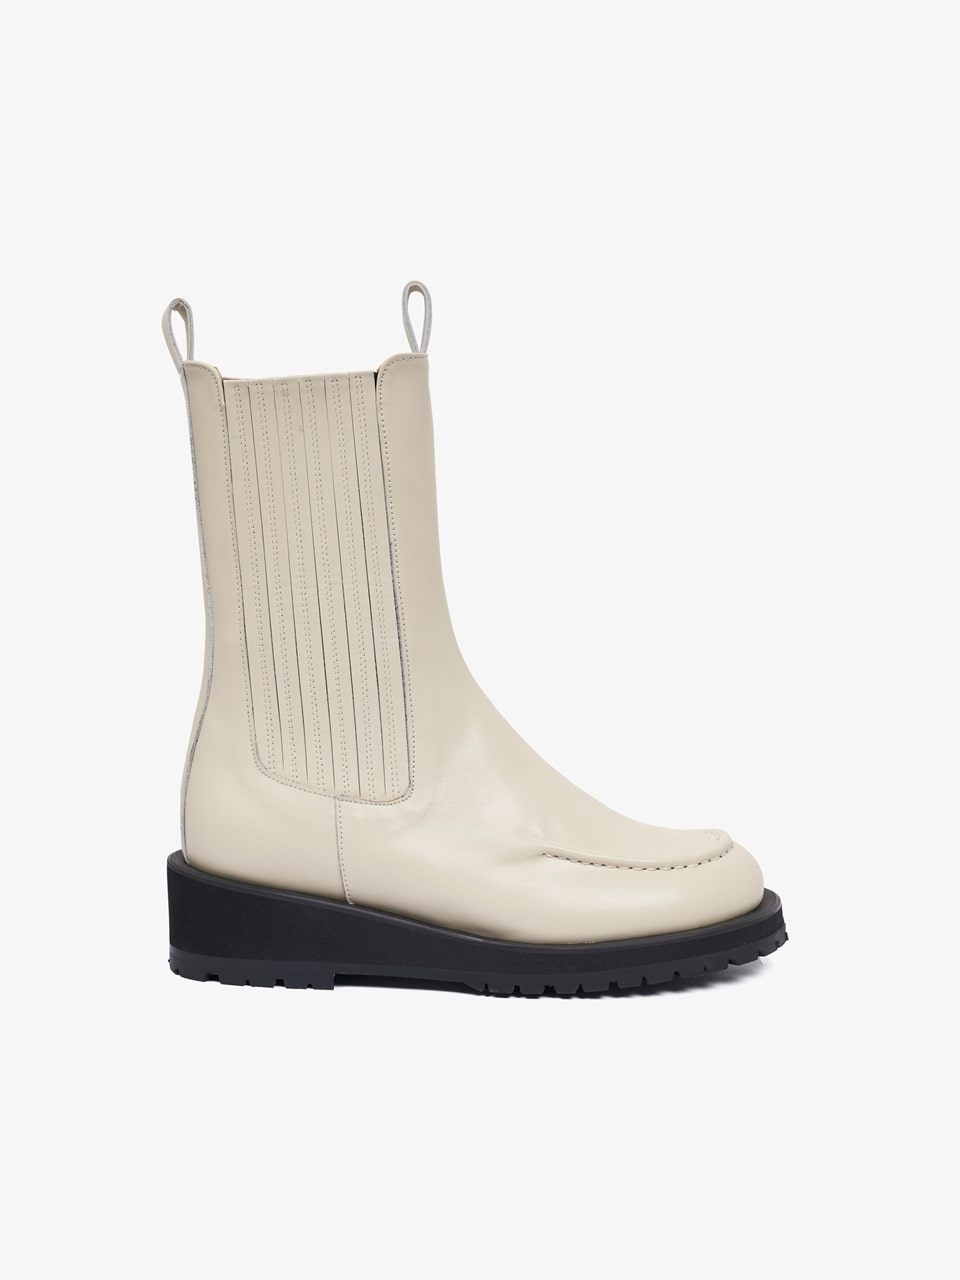 45mm Kendra Rugged Boots (White)